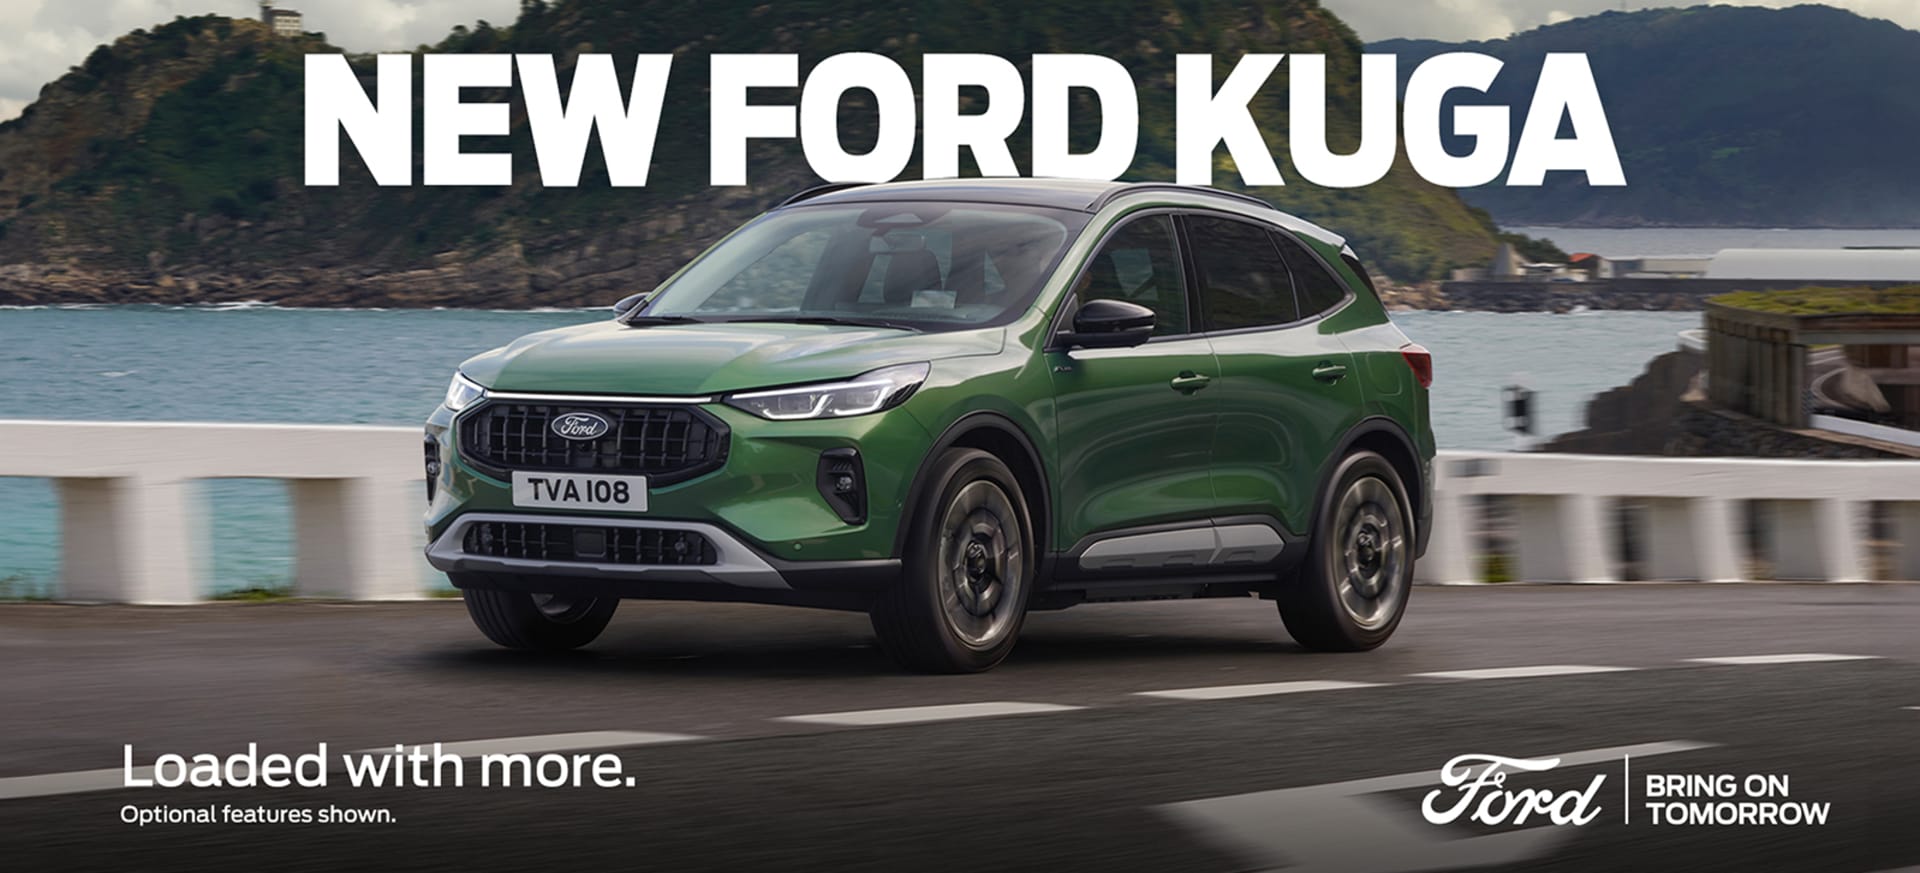 New Ford Kuga - Loaded With More